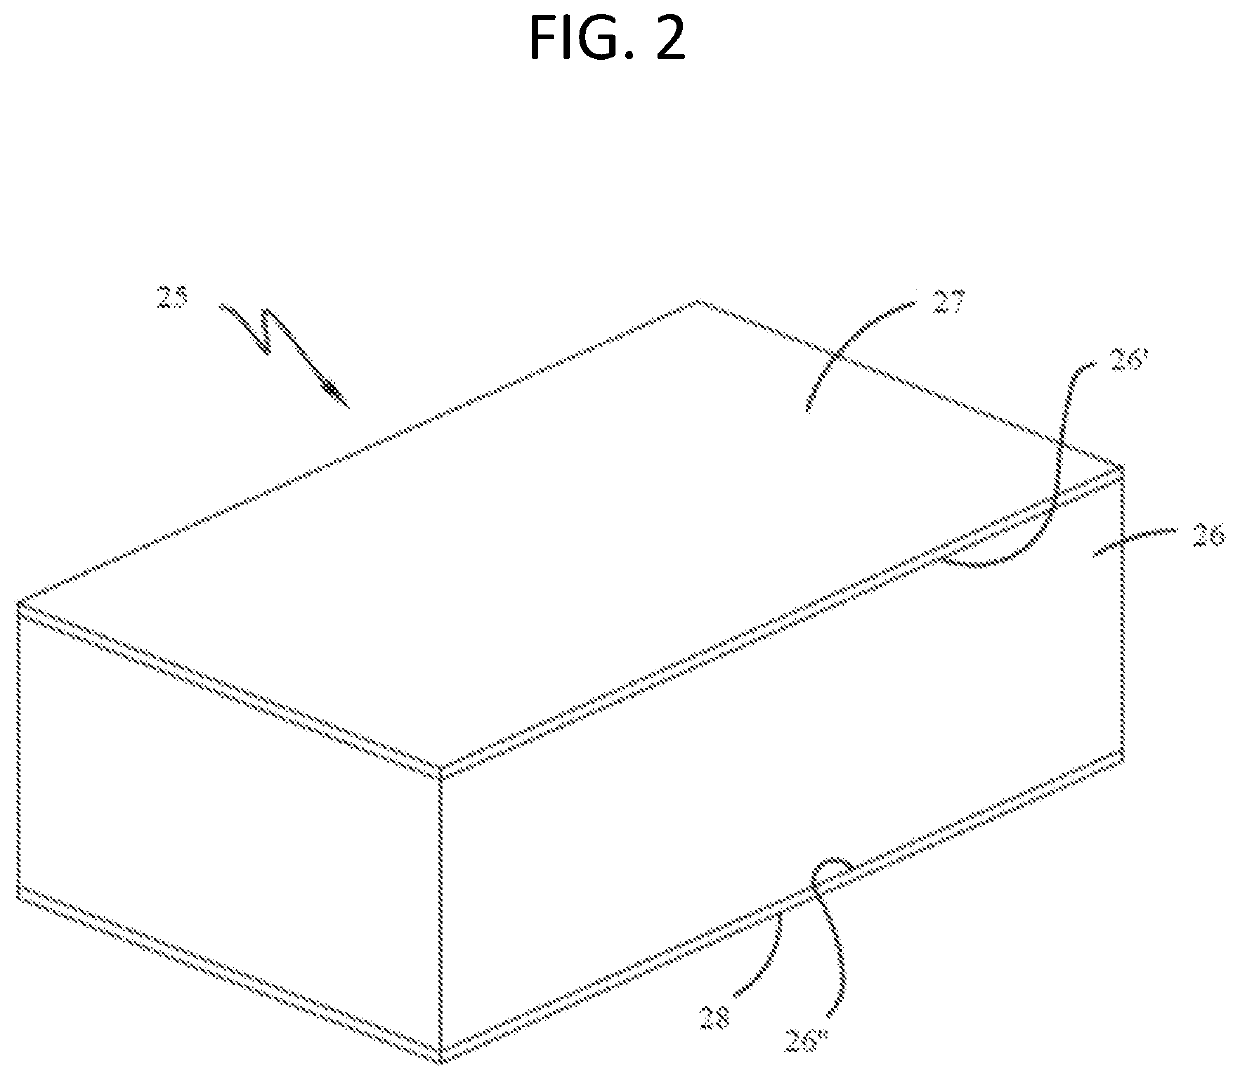 Process for producing isocyanate-based foam construction boards